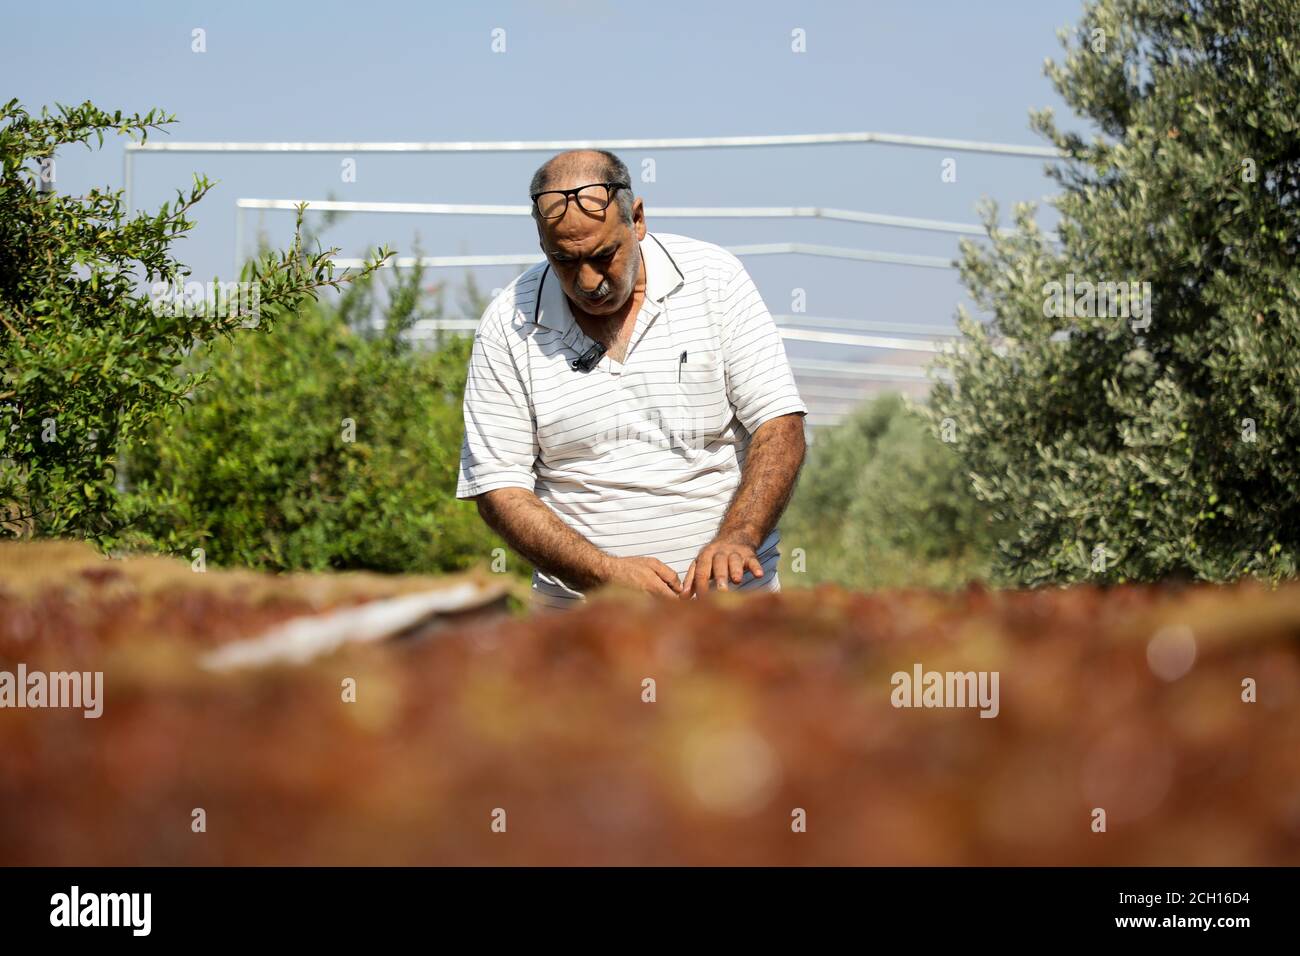 September 13, 2020: Jenin, Palestine. 13 September 2020. A Palestinian farmer spreads grapes evenly on boards as he dries them in the sun to produce sultanas in the village of Arrabah, near Jenin, in the northern West Bank. Jenin is renowned for its fertile land and its abundan ce of fruits and vegetables, yet much land has been confiscated by the Israeli authorities to construct Israeli settlements and the separation wall, with Israeli also controlling Jenin's water resources. The current pandemic has further compounded the dire economic condition in Jenin and in the rest of the Palestinian Stock Photo